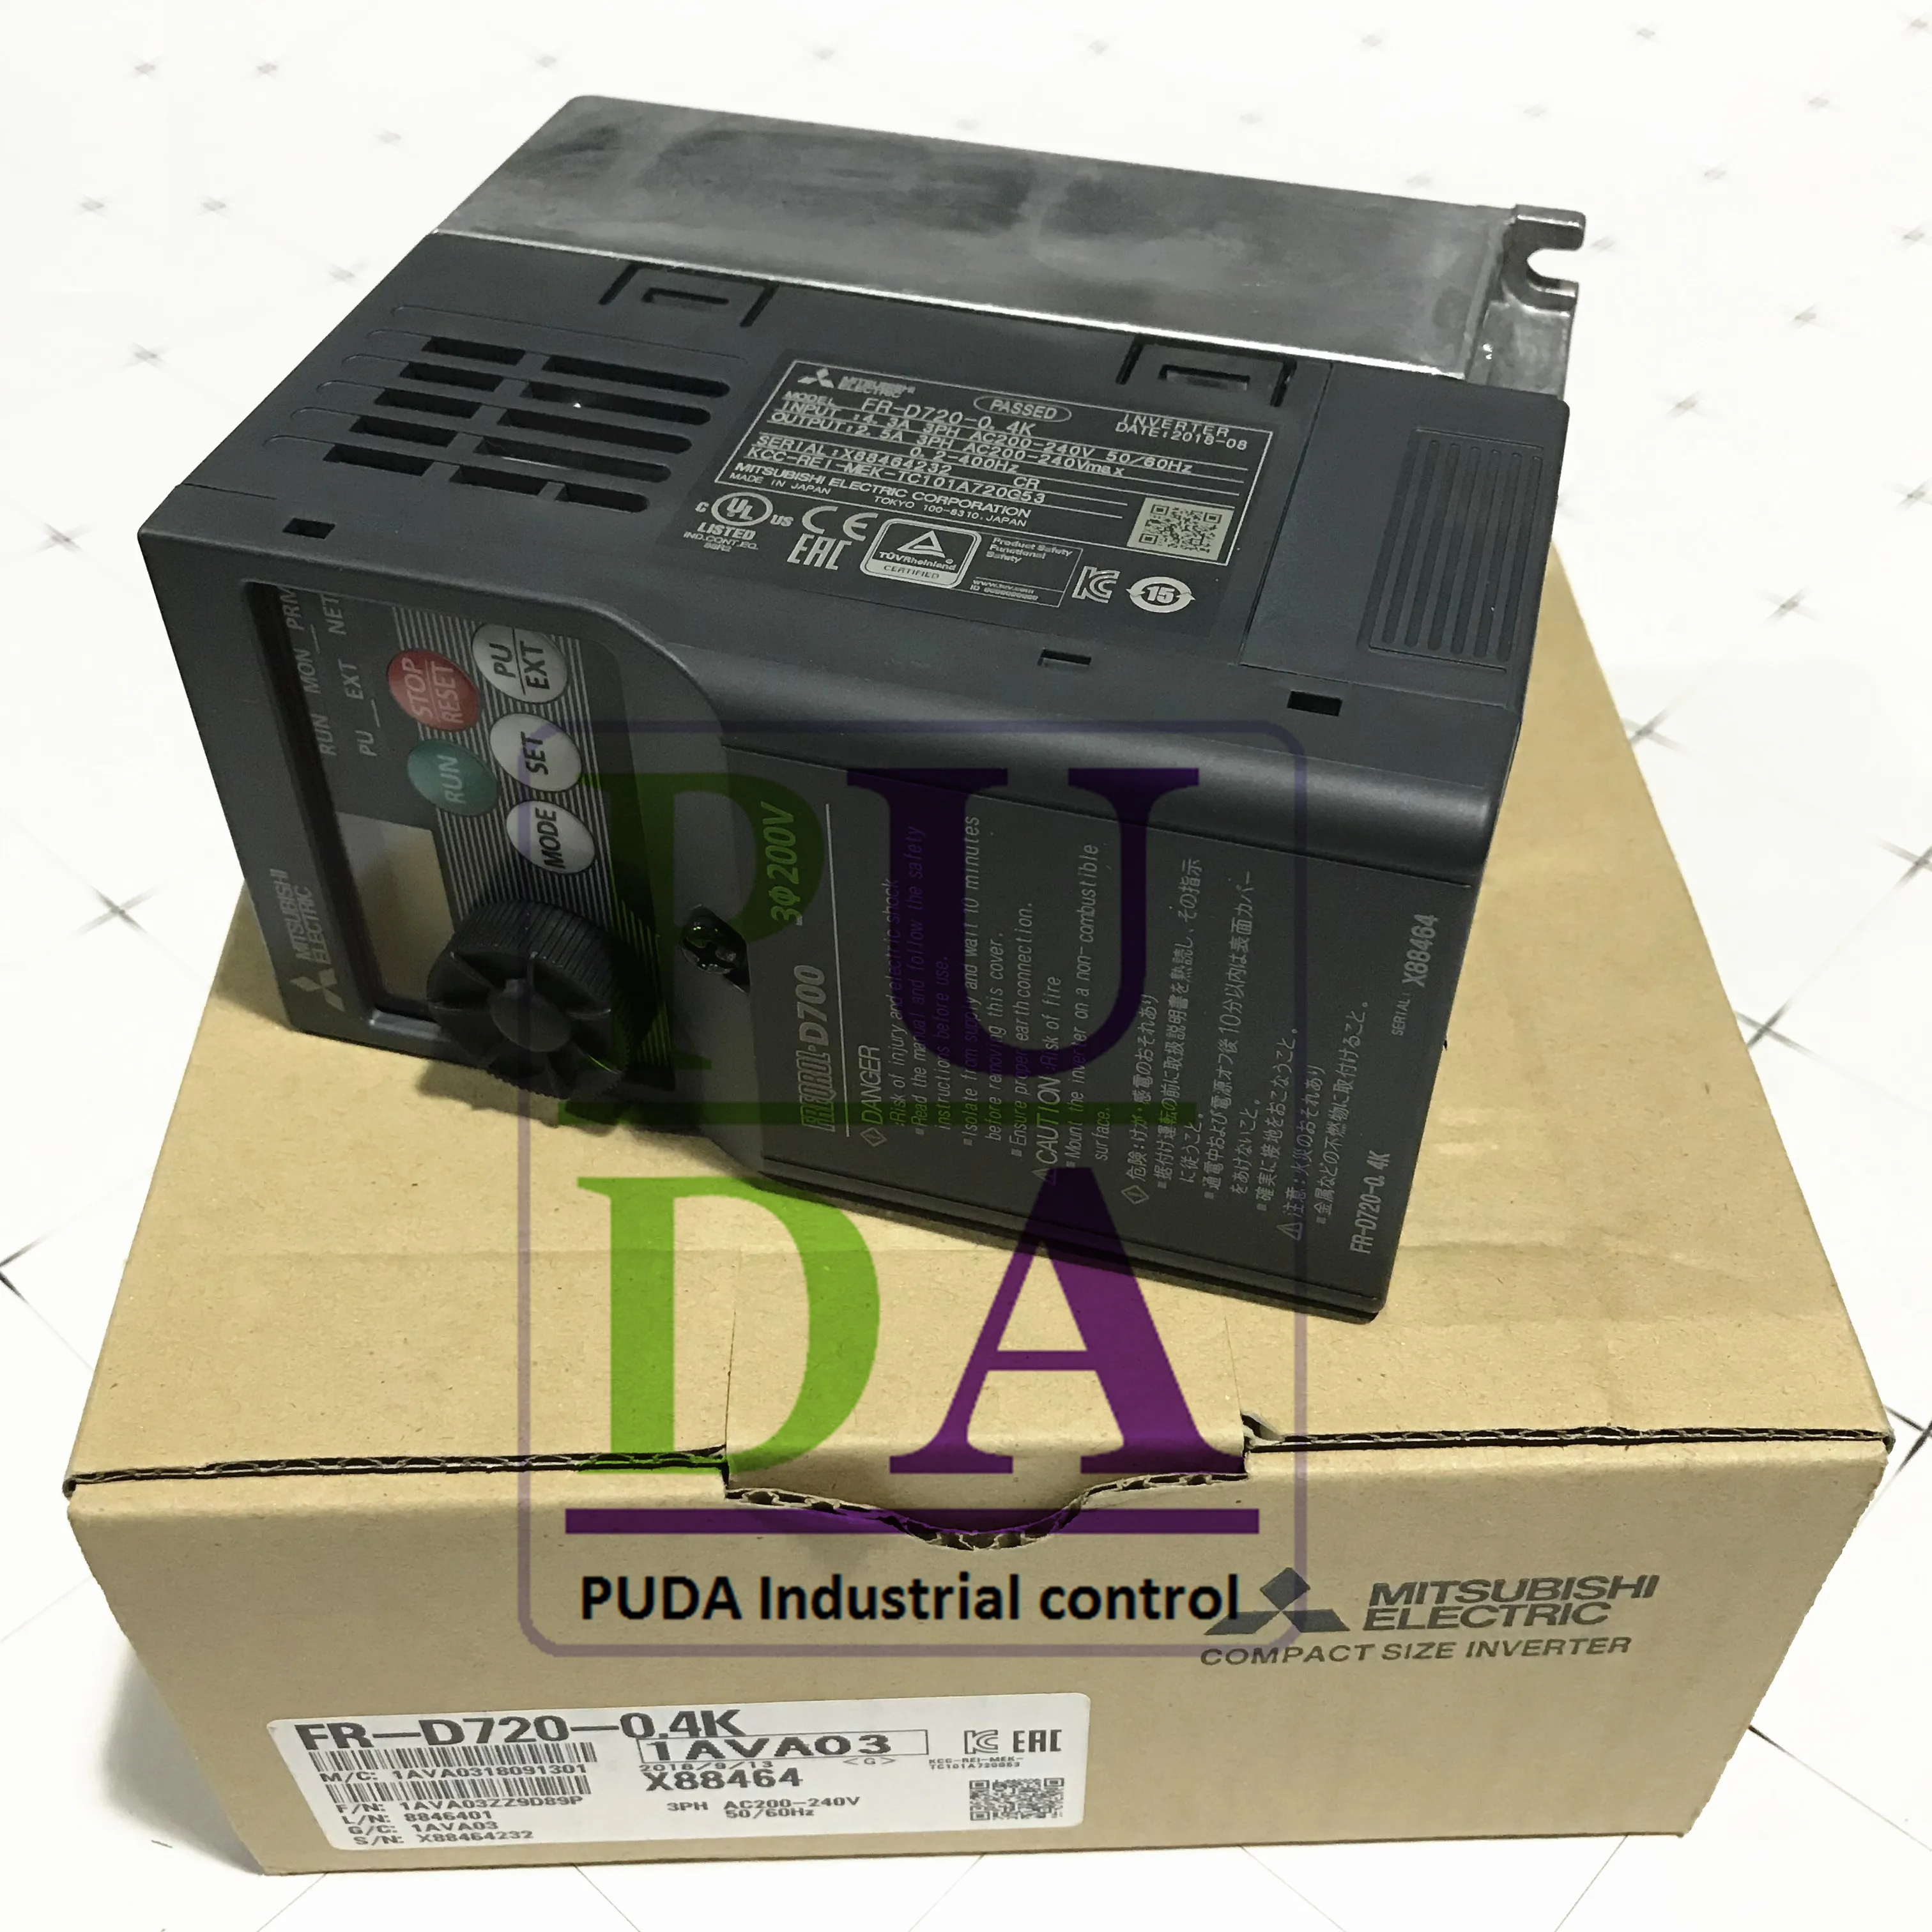 Spot Goods Quick Delivery For New And Original Mitsubishi Fr-d720-0.4k Long  Warranty 1 Year Fr-d720-0.4k - Buy Fr-d720-0.4k,Mitsubishi  Inverter,Mitsubishi Fr-d720-0.4k Product on Alibaba.com